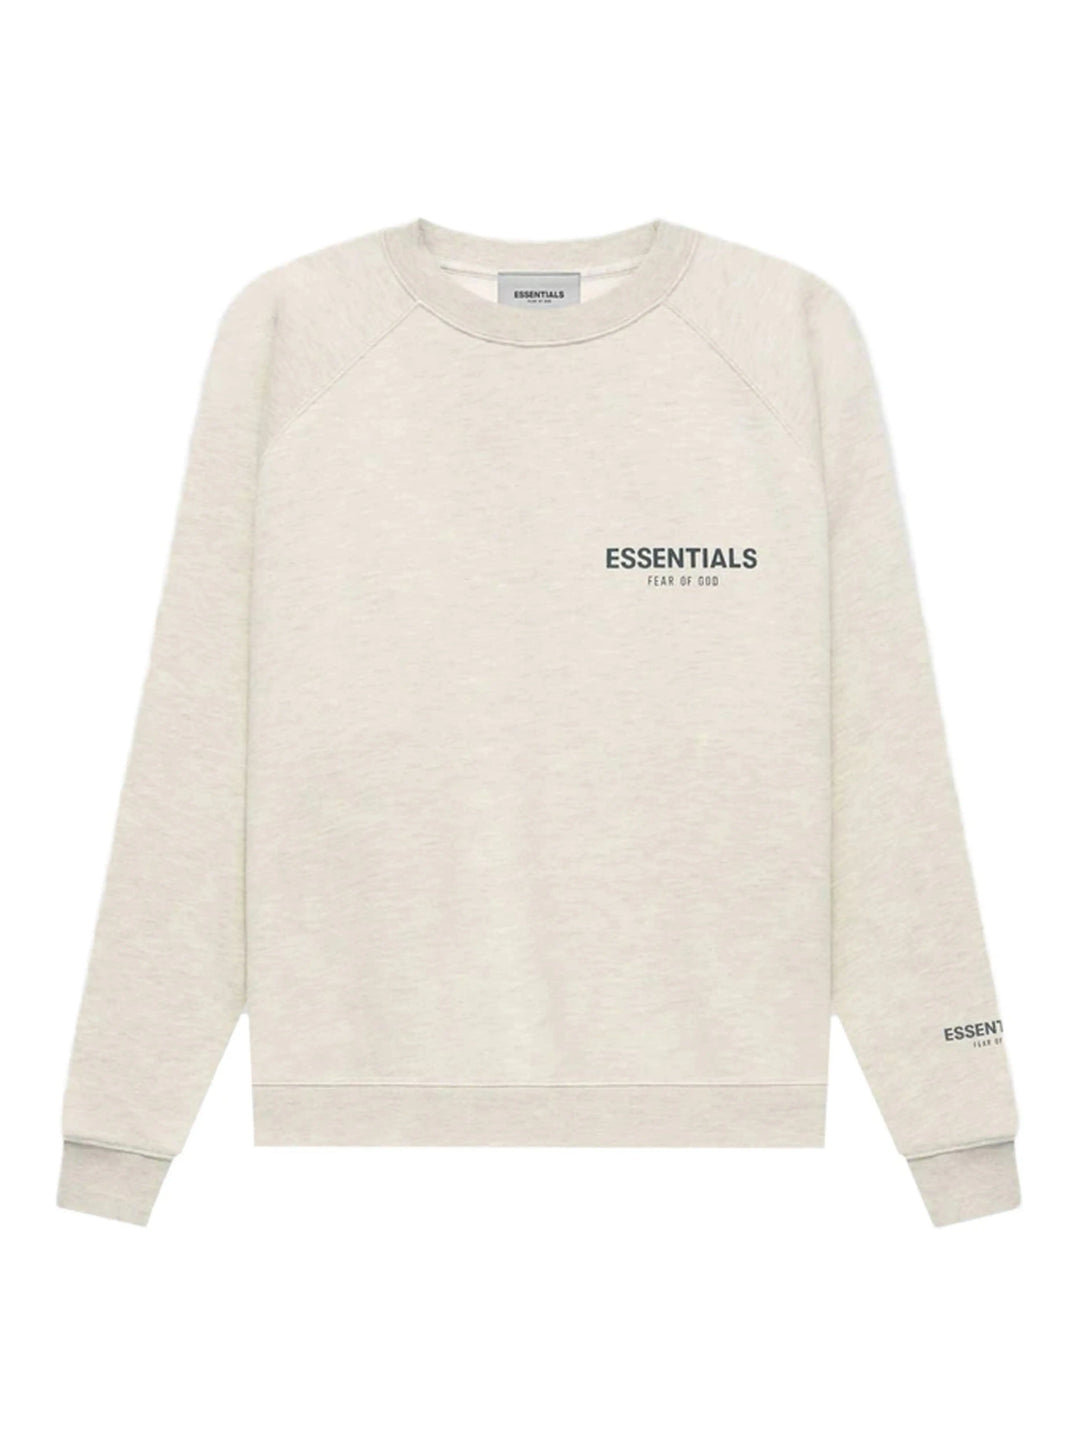 Fear Of God Essentials Core Collection Crewneck Light Heather Oatmeal [FW21] Prior